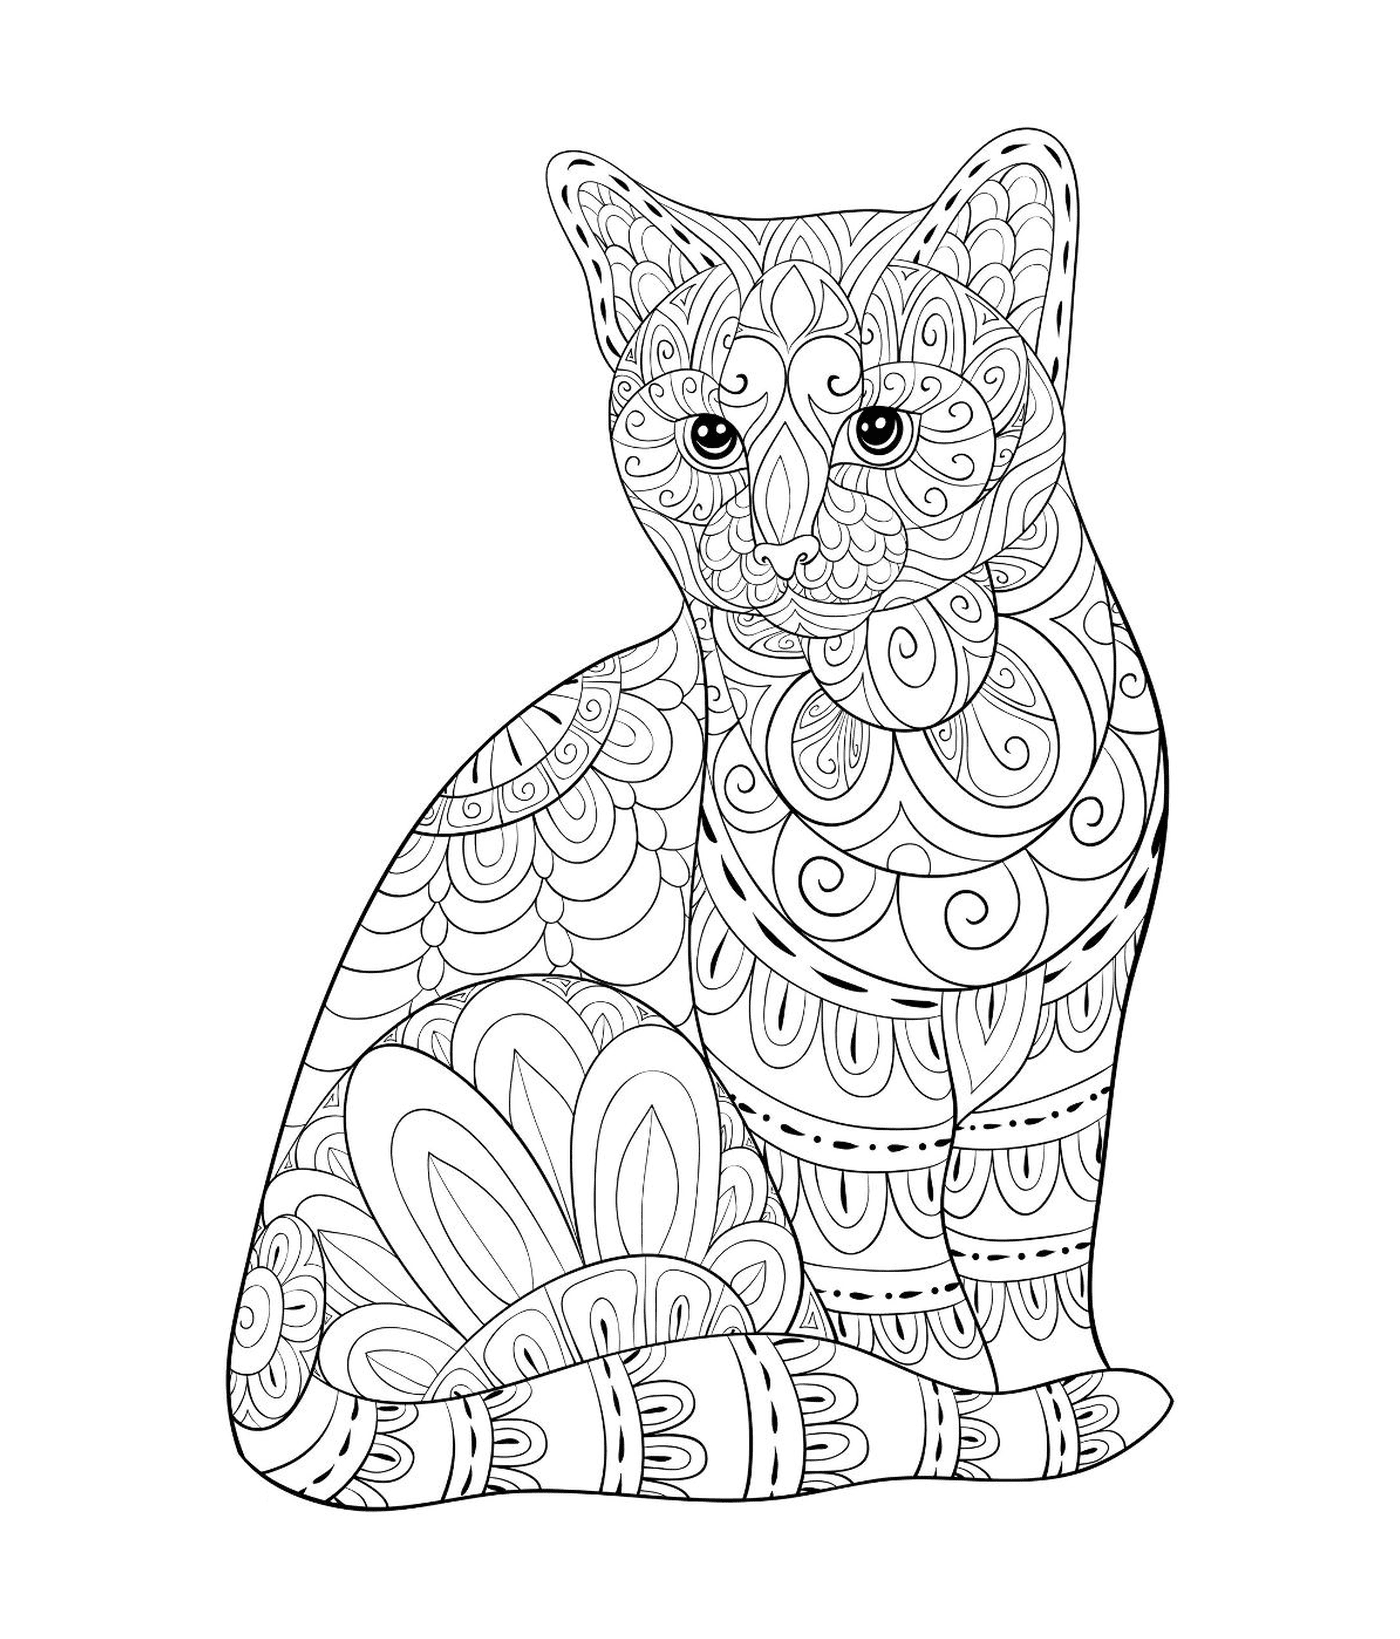  A cat with zentangle patterns sitting on the floor 